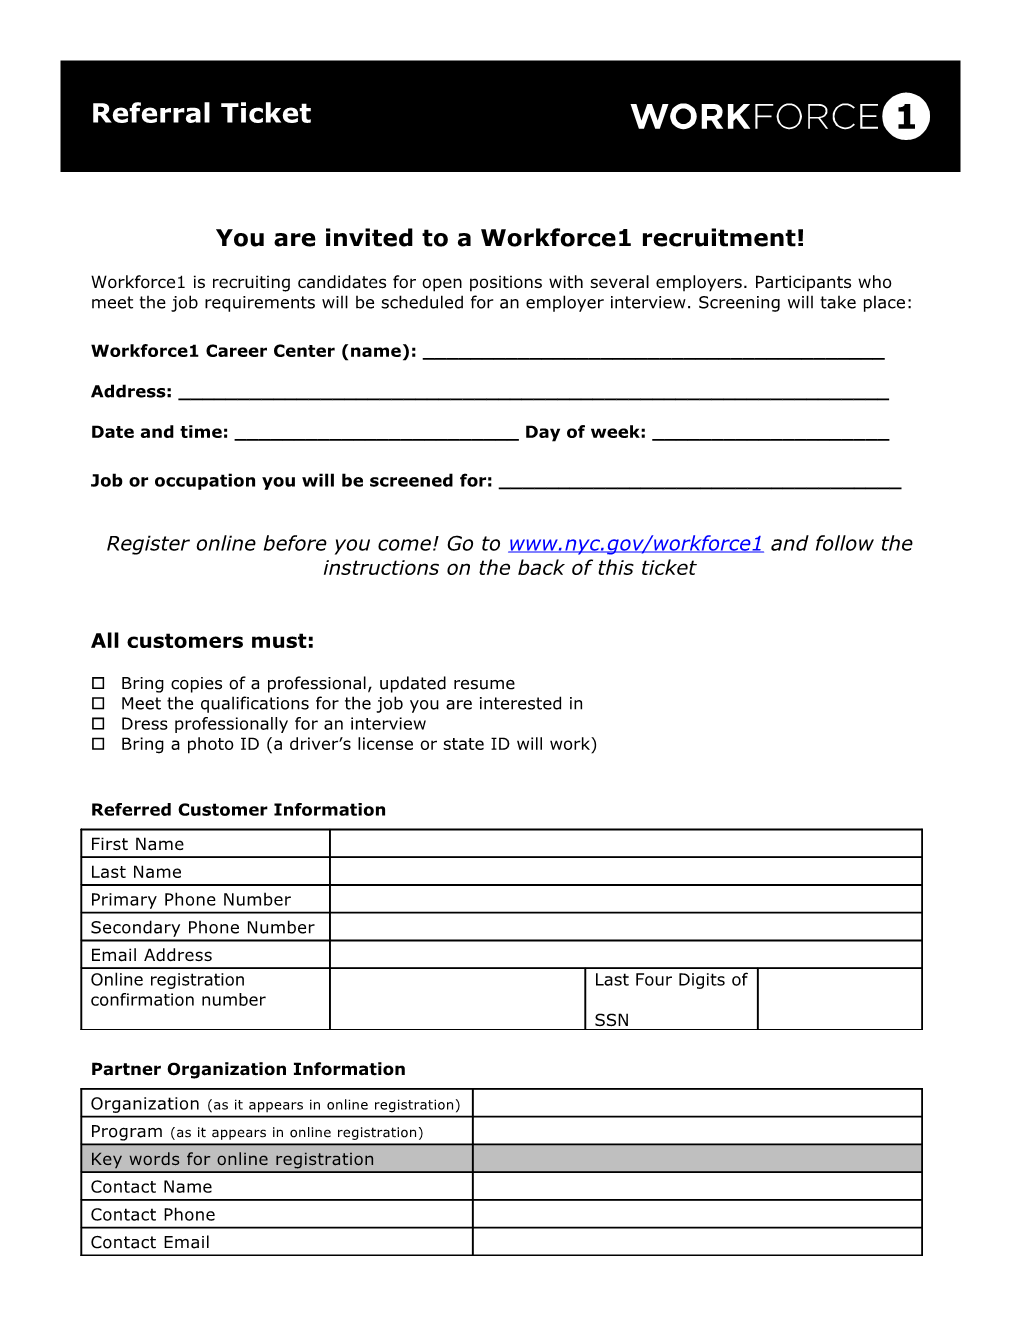 You Are Invited to a Workforce1 Recruitment!